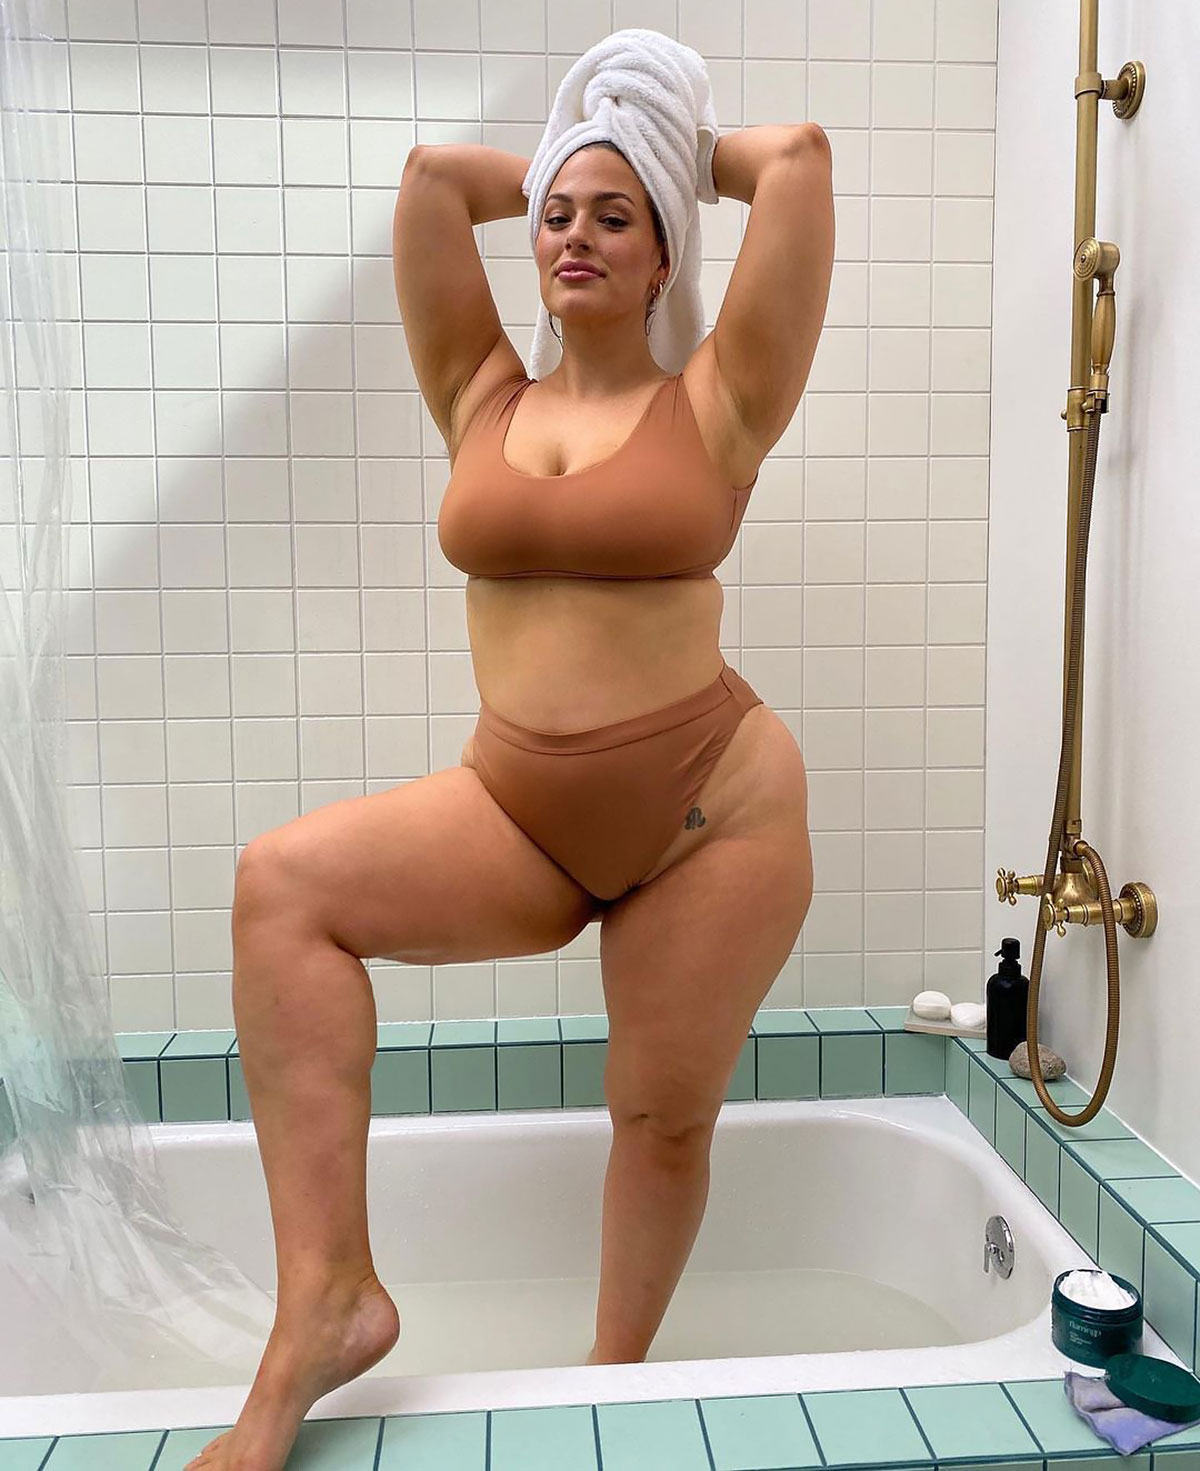 Ashley Graham shows off her curves in lacy lingerie